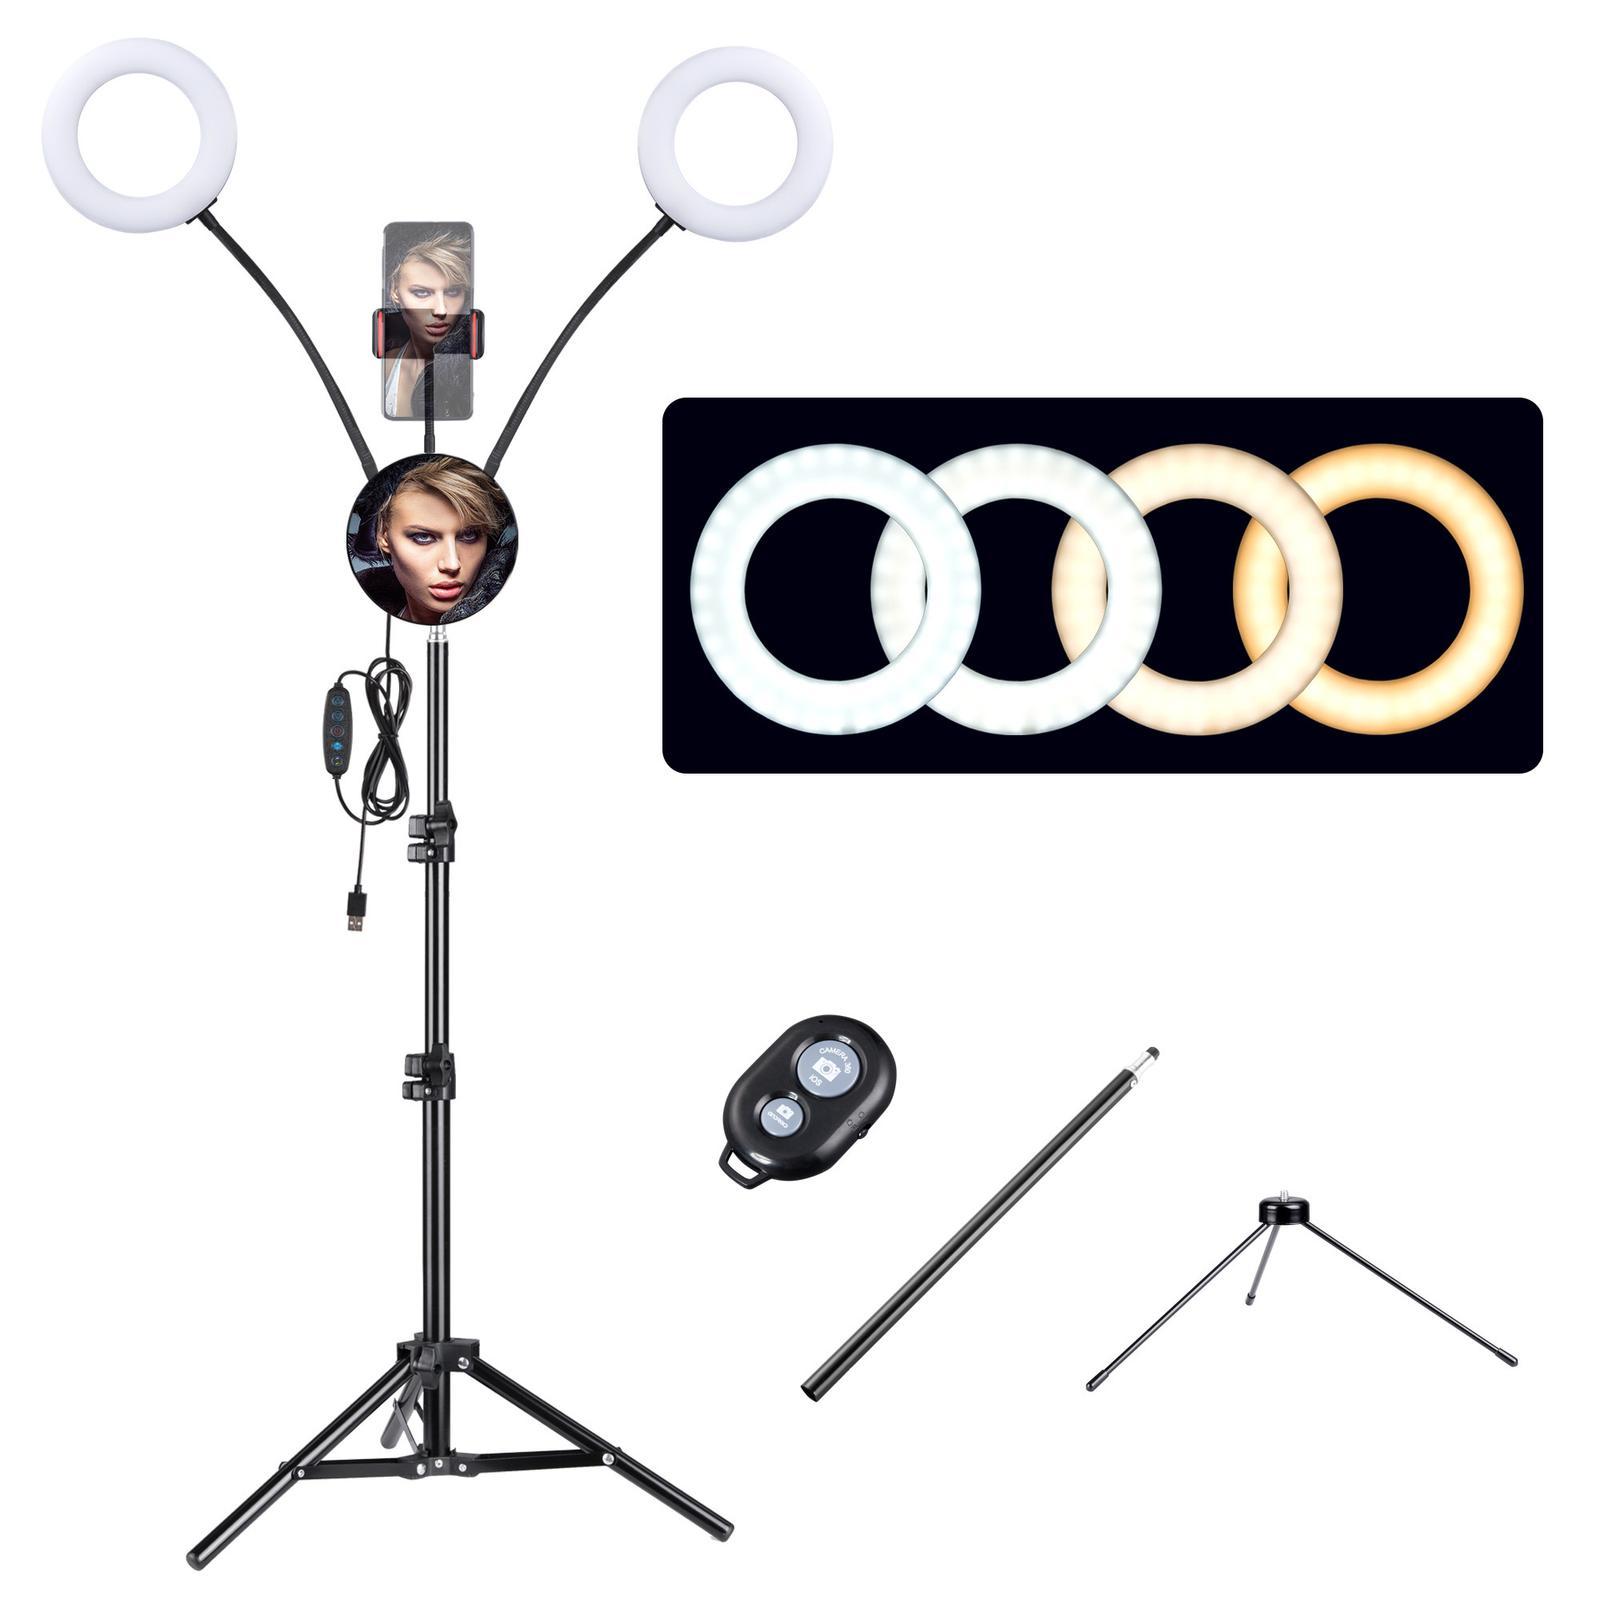 Ring light tripod with remote and accessories